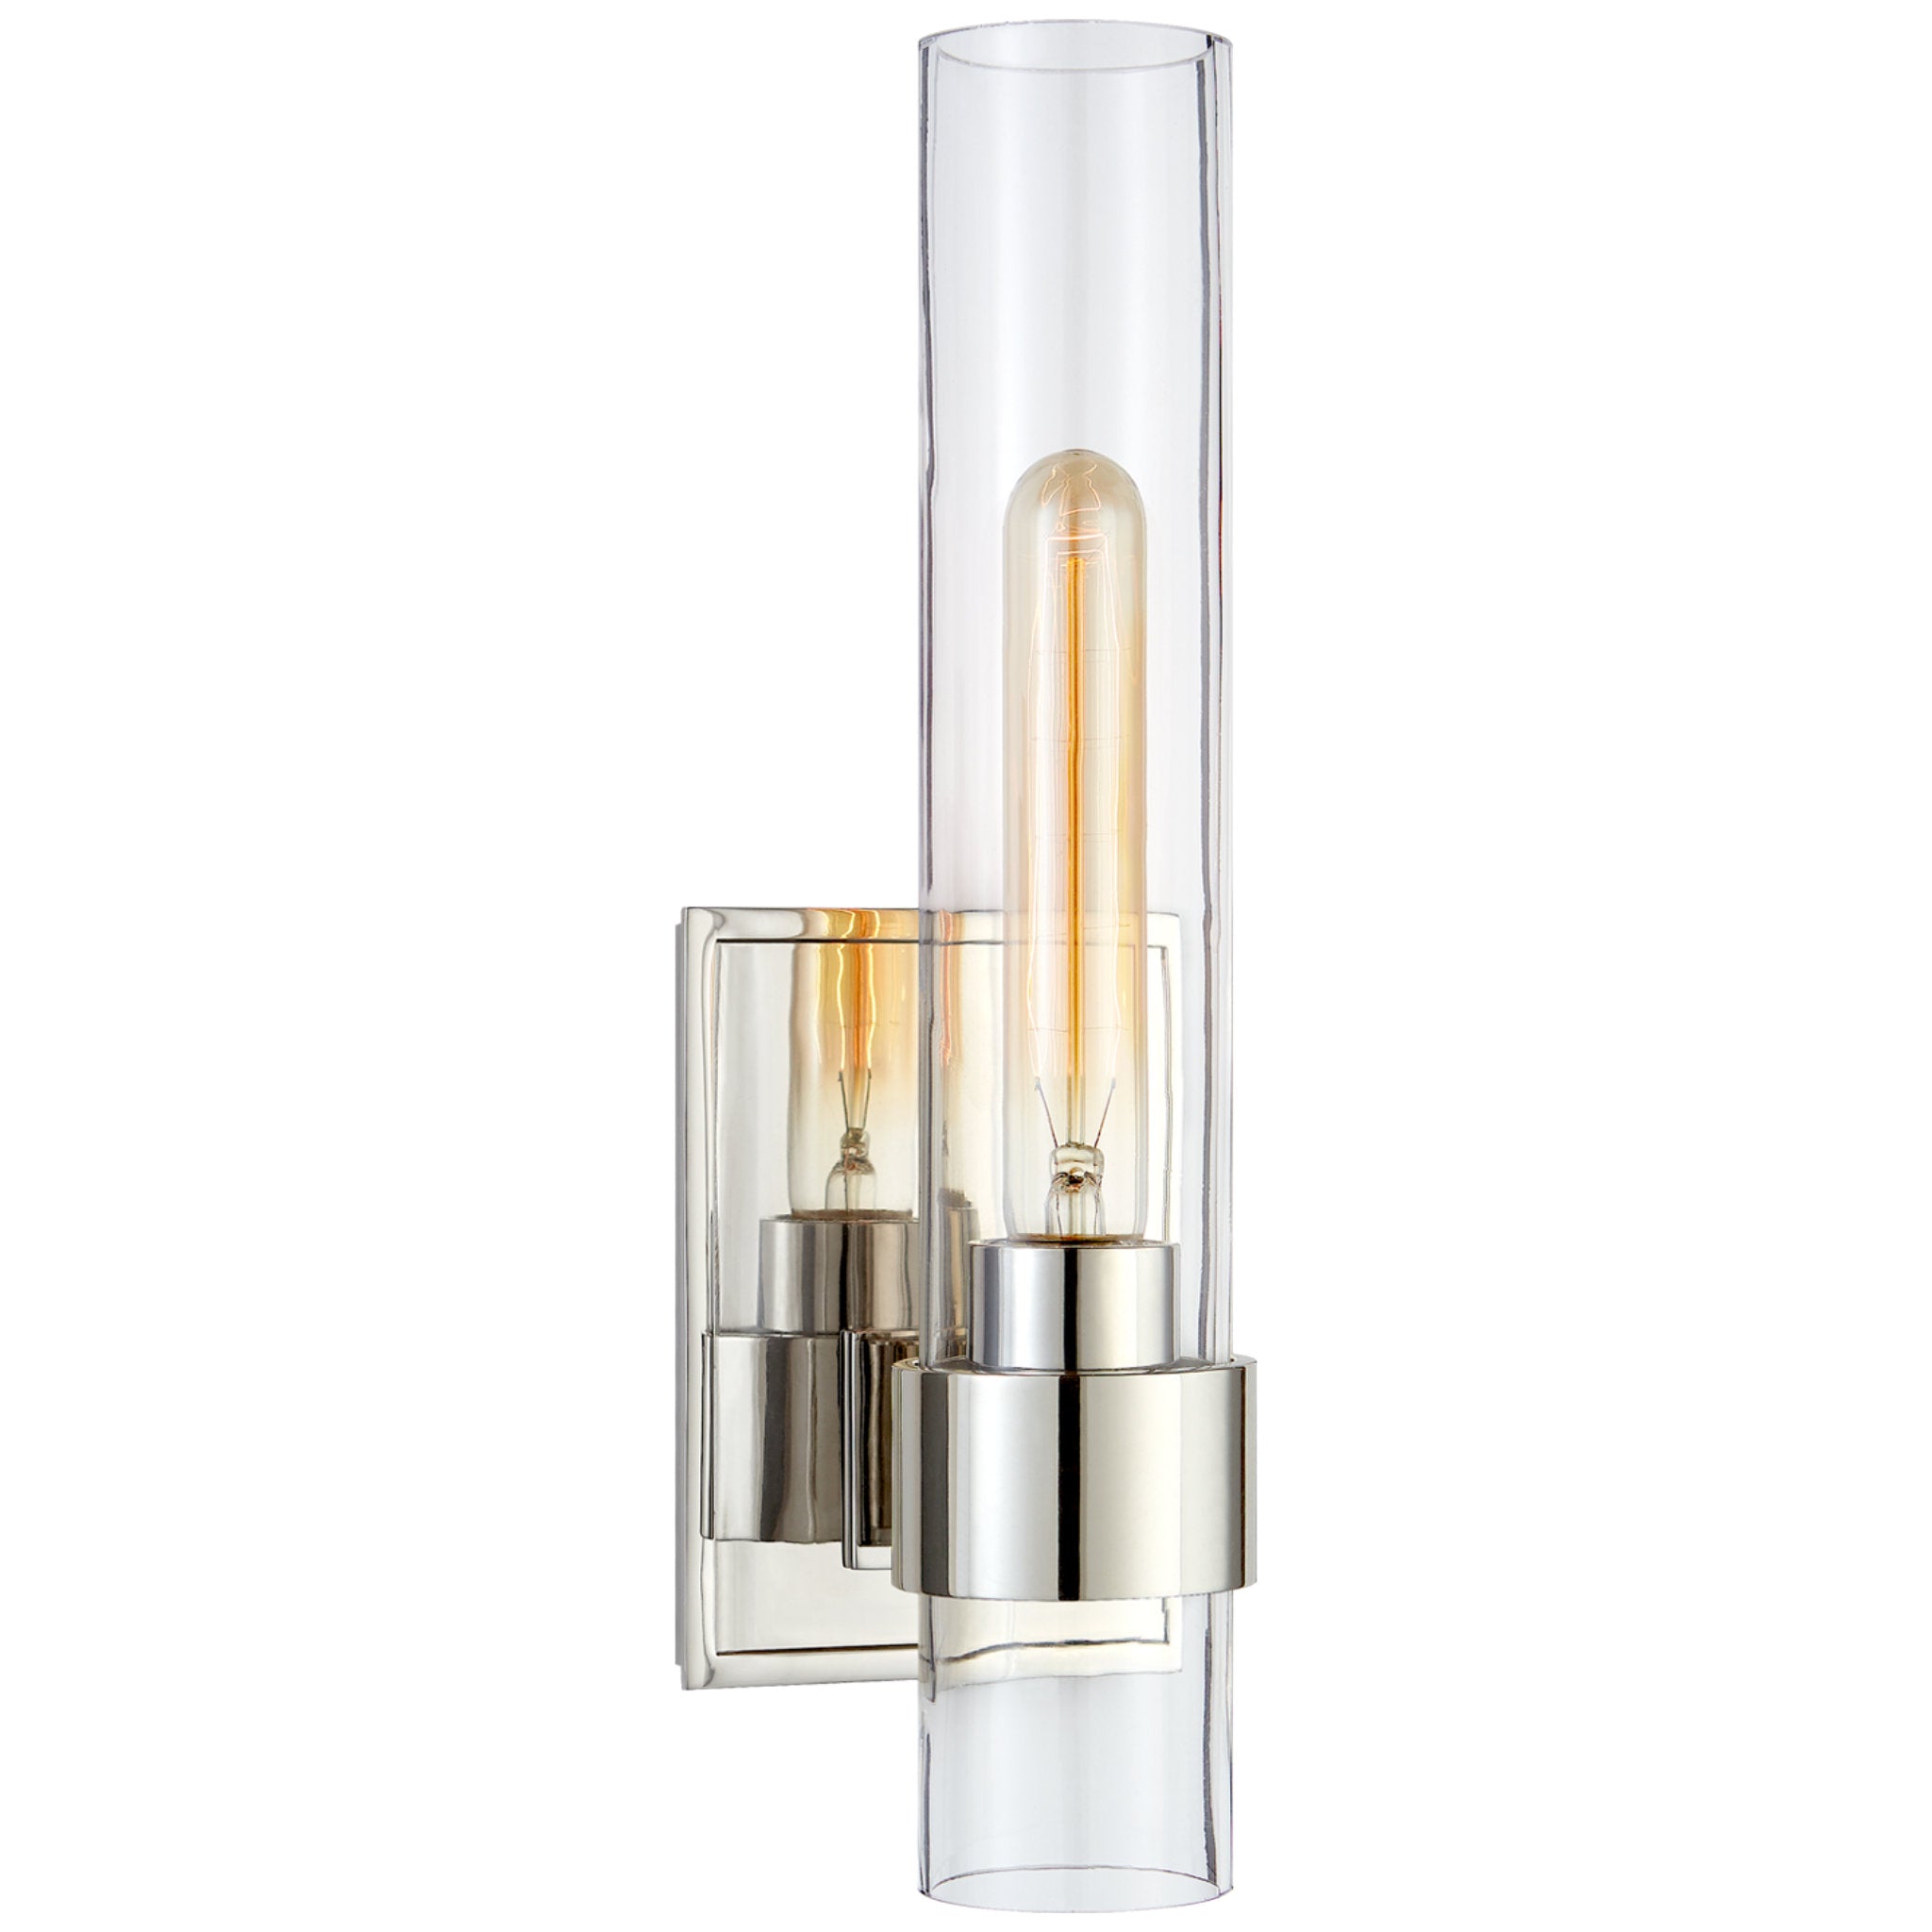 Ian K. Fowler Presidio Petite Sconce in Polished Nickel with Clear Glass